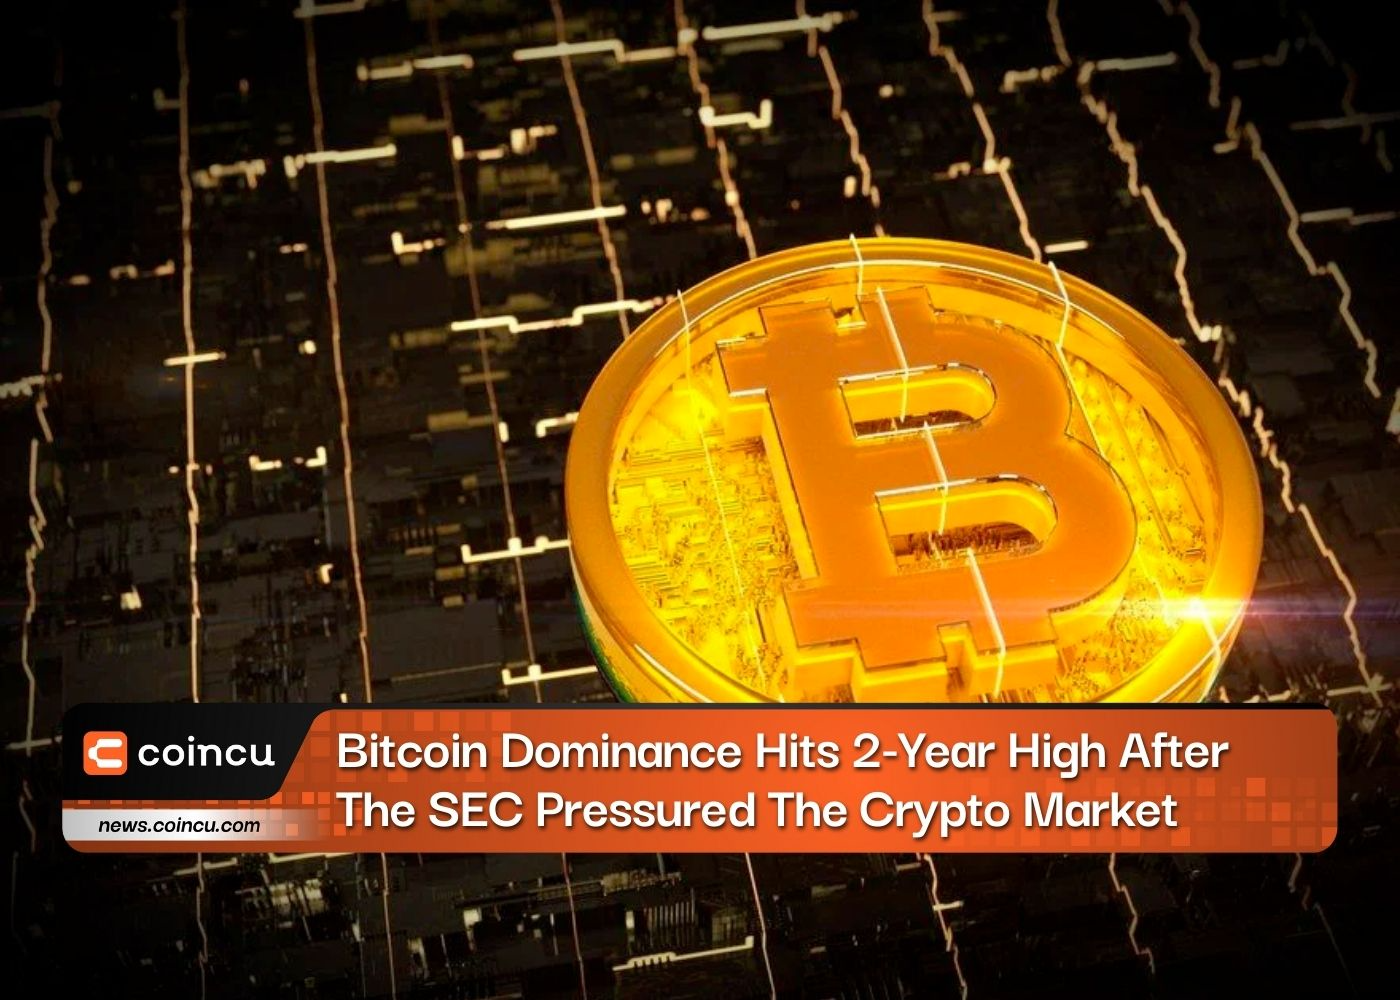 Bitcoin Dominance Hits 2-Year High After The SEC Pressured The Crypto Market